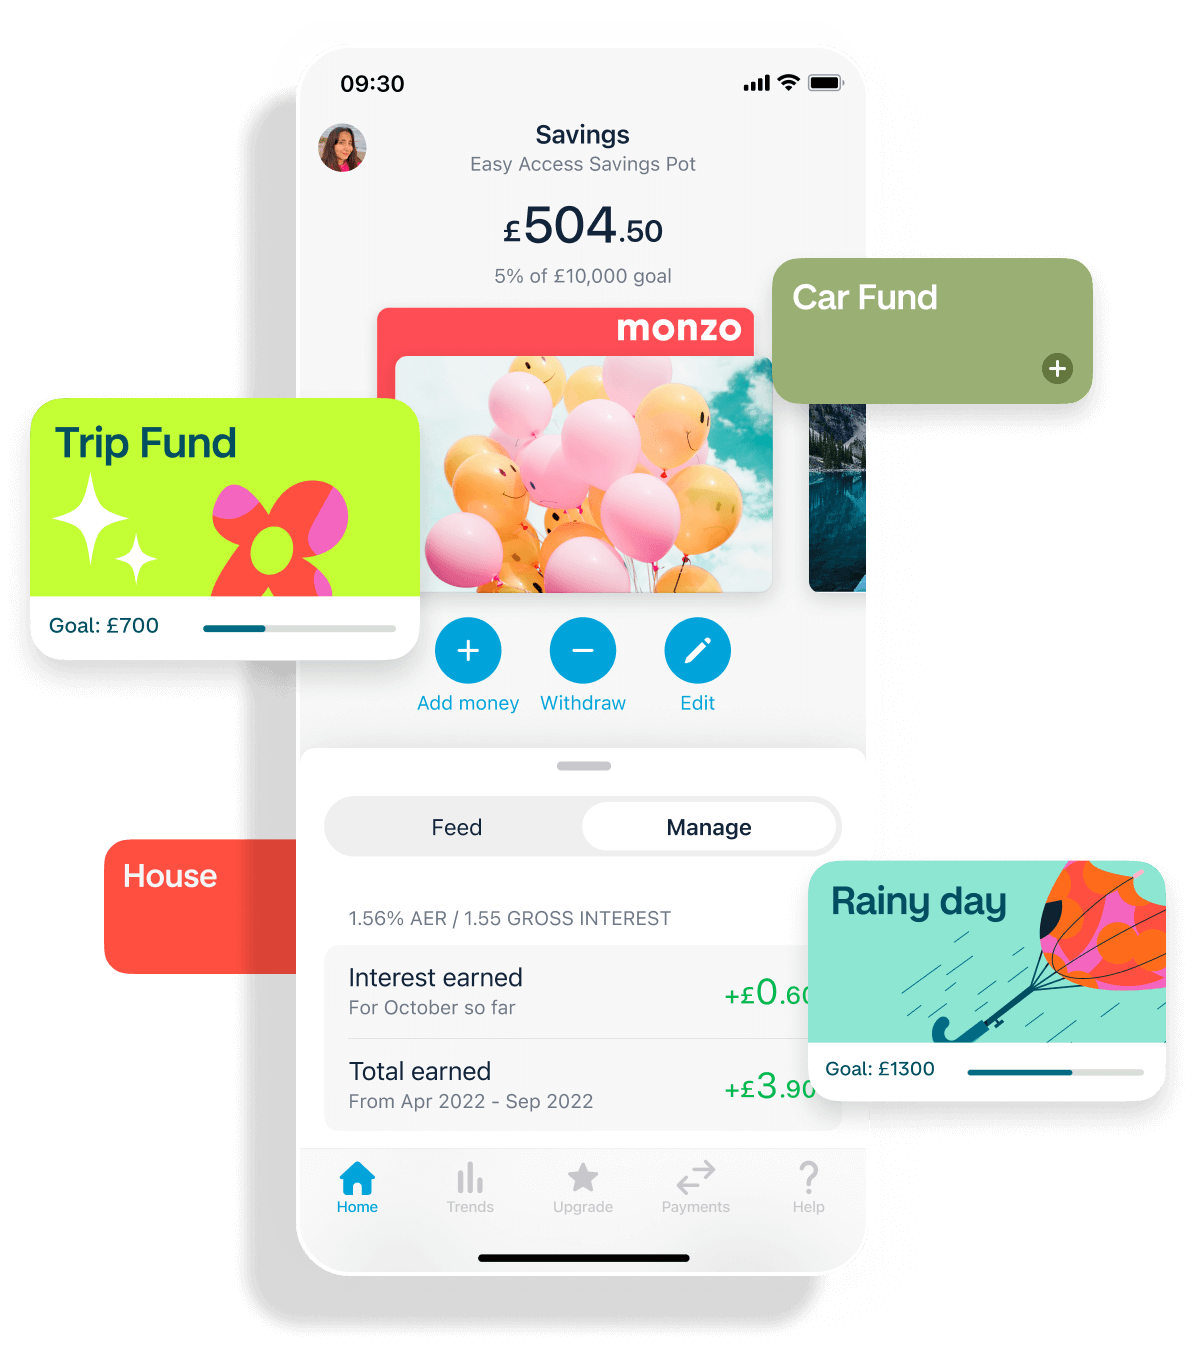 Lots of different ways to use Monzo savings pots